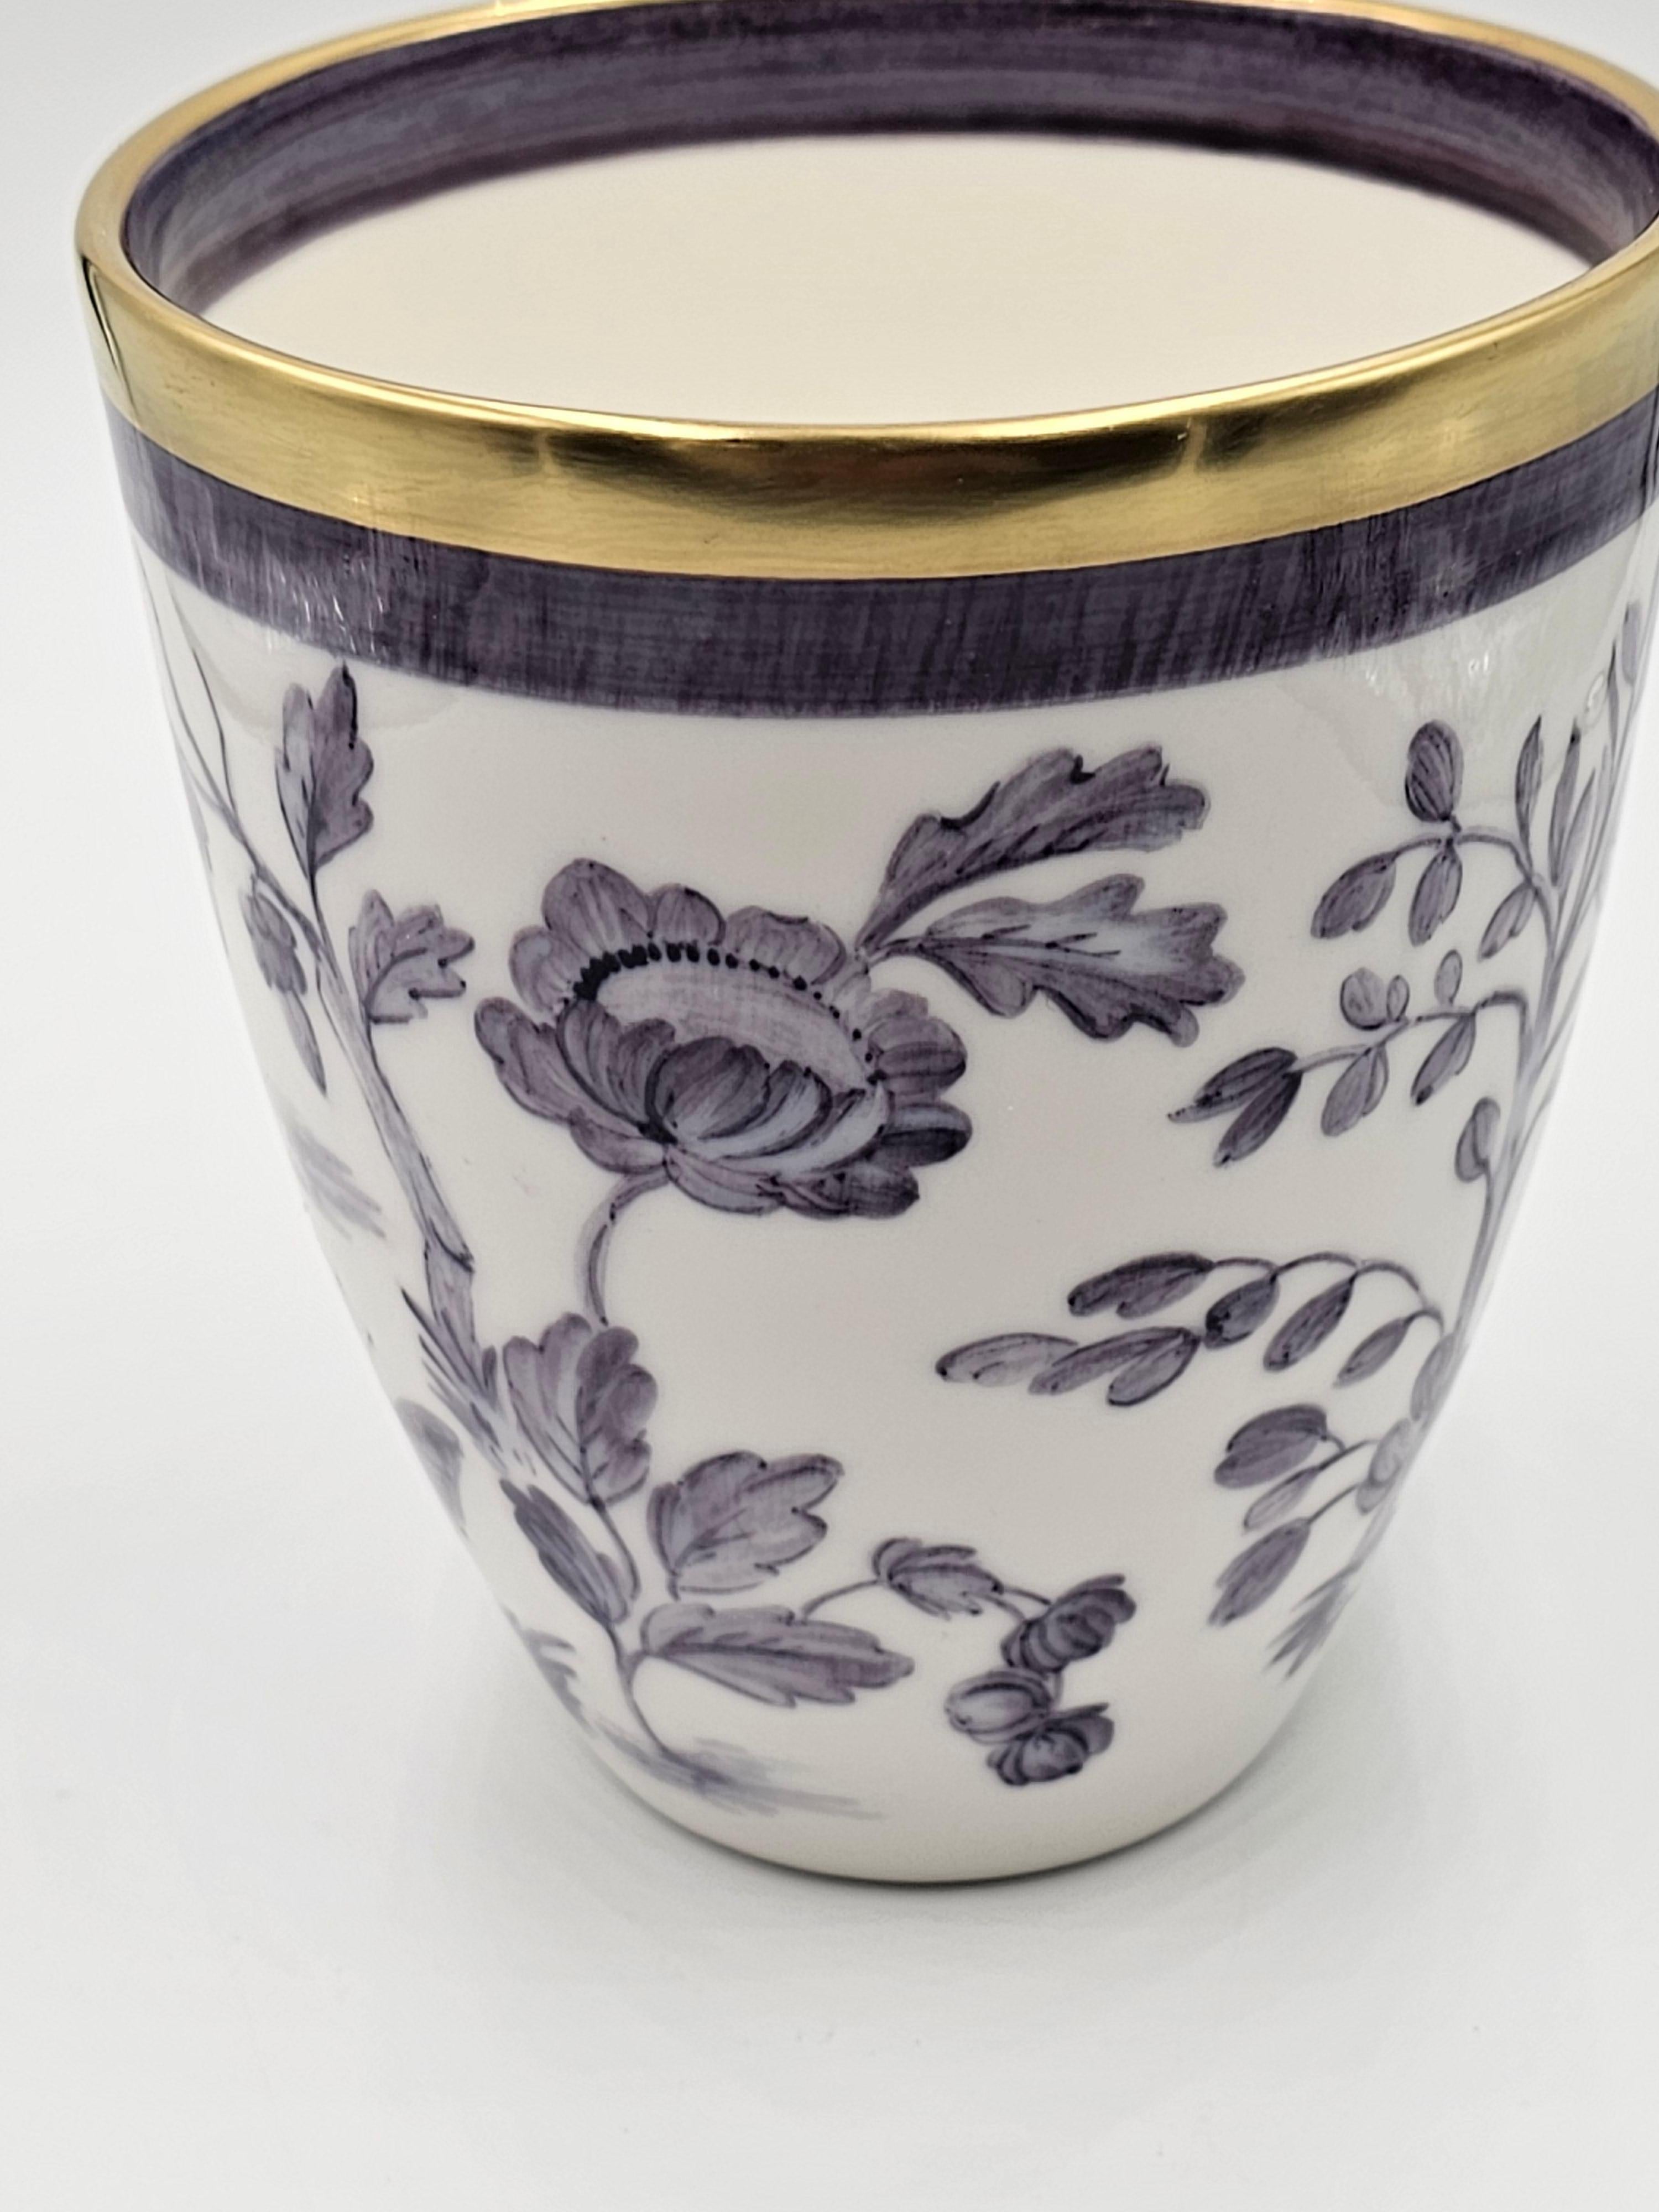 Hands-free painted porcelain vase with a chinoiserie decor all around. Rimmed with a platinum rim. Completely made by hand in Bavaria/Germany with exclusive decors for Sofina Boutique Kitzbühel.
Looks beautiful with fresh flowers or with